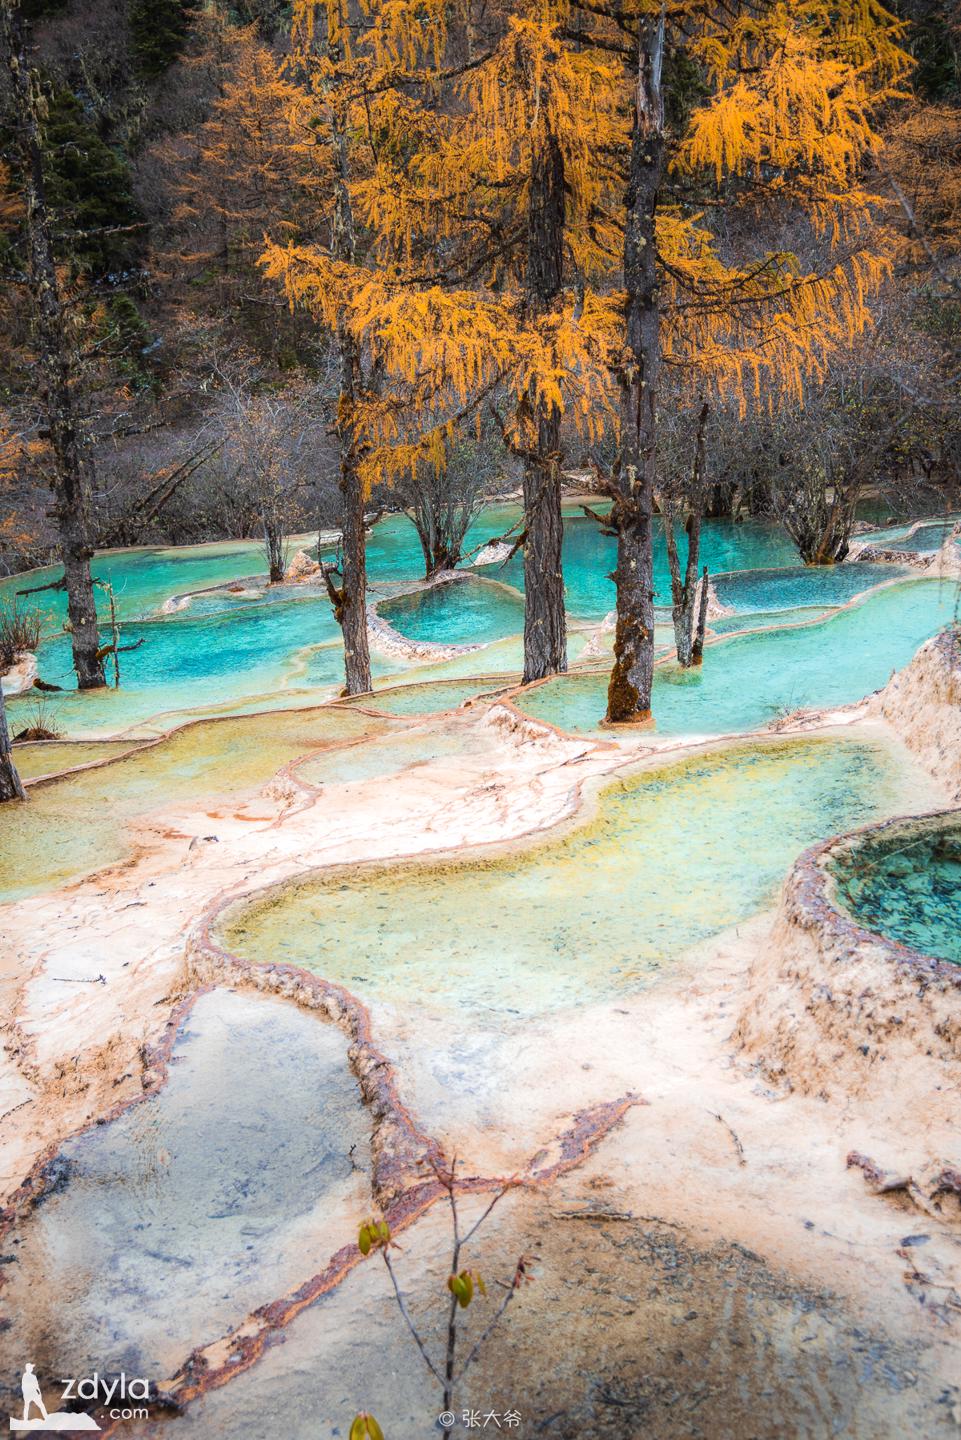 Huanglong colorful pool in snow field